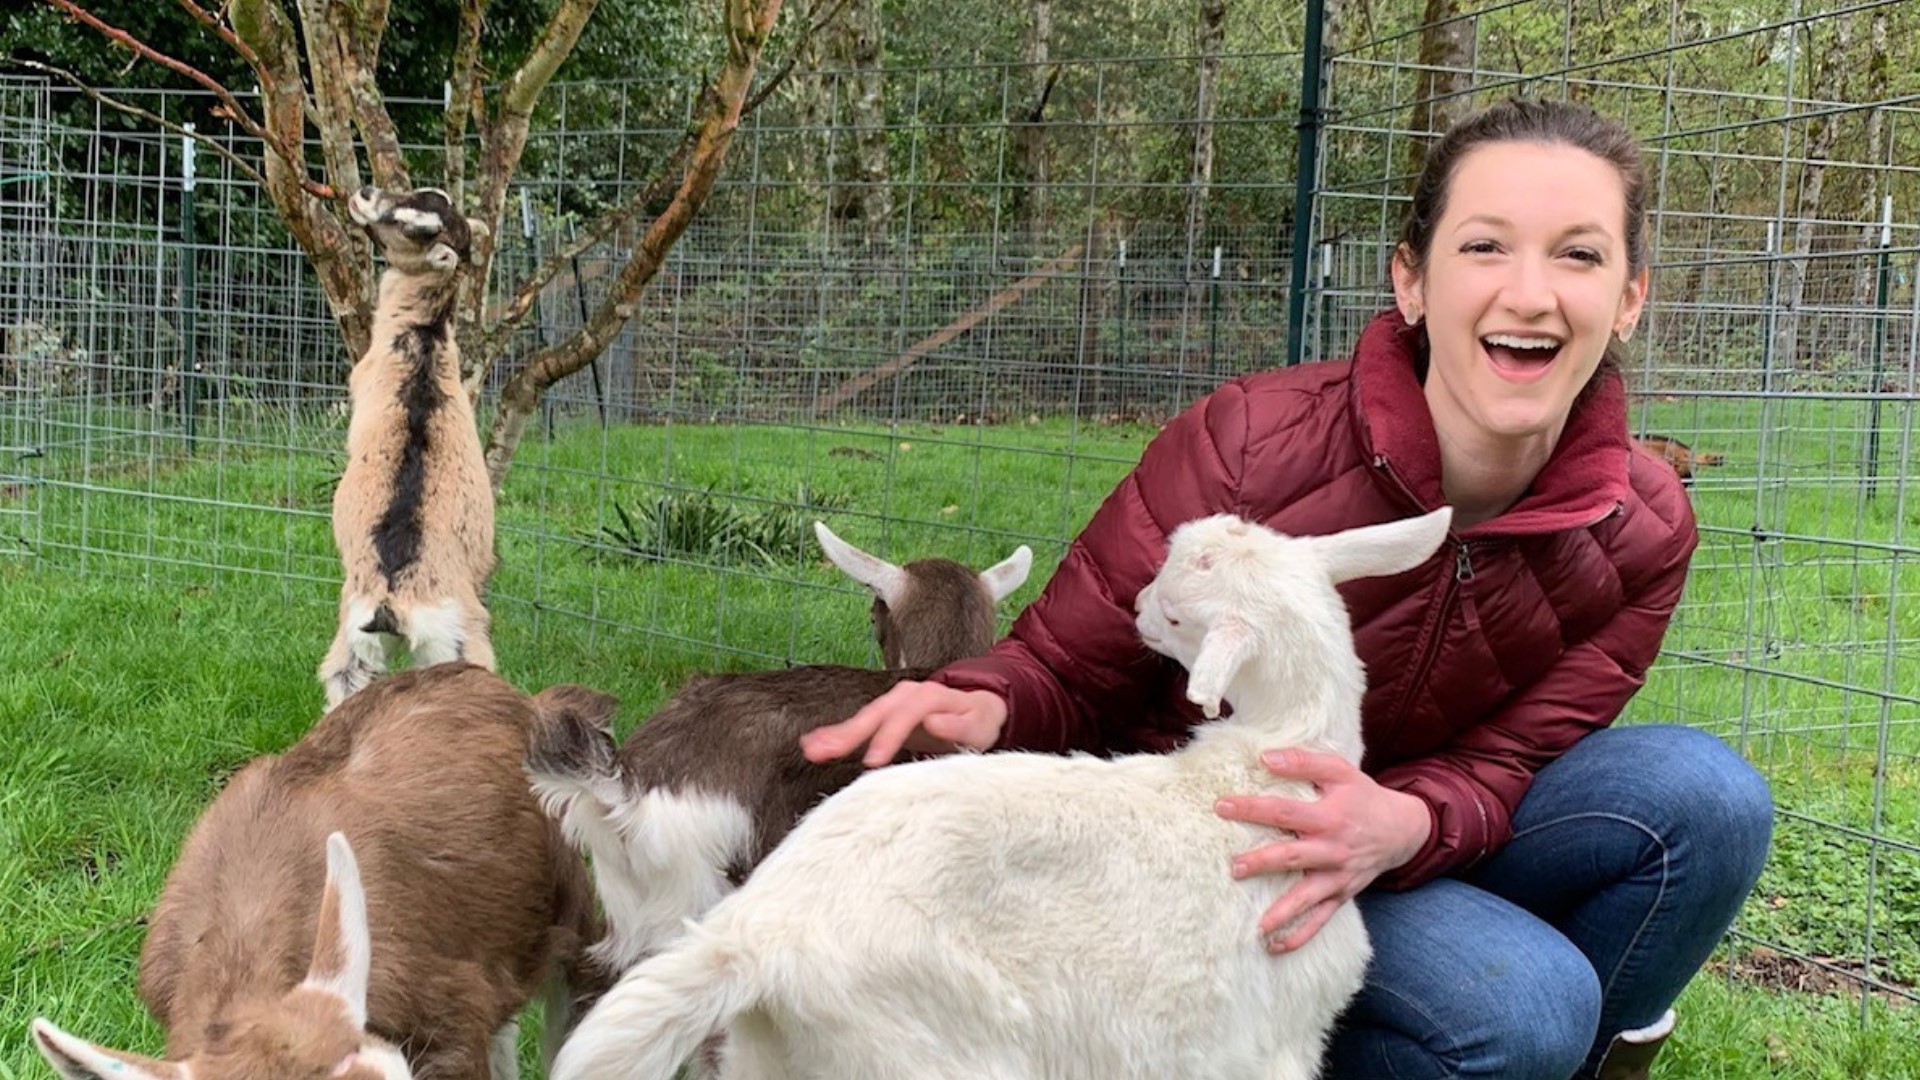 Does 2 hours of snuggling with adorable baby goats sound like the best date ever? Maple Valley's Puget Sound Goat Rescue has your back.